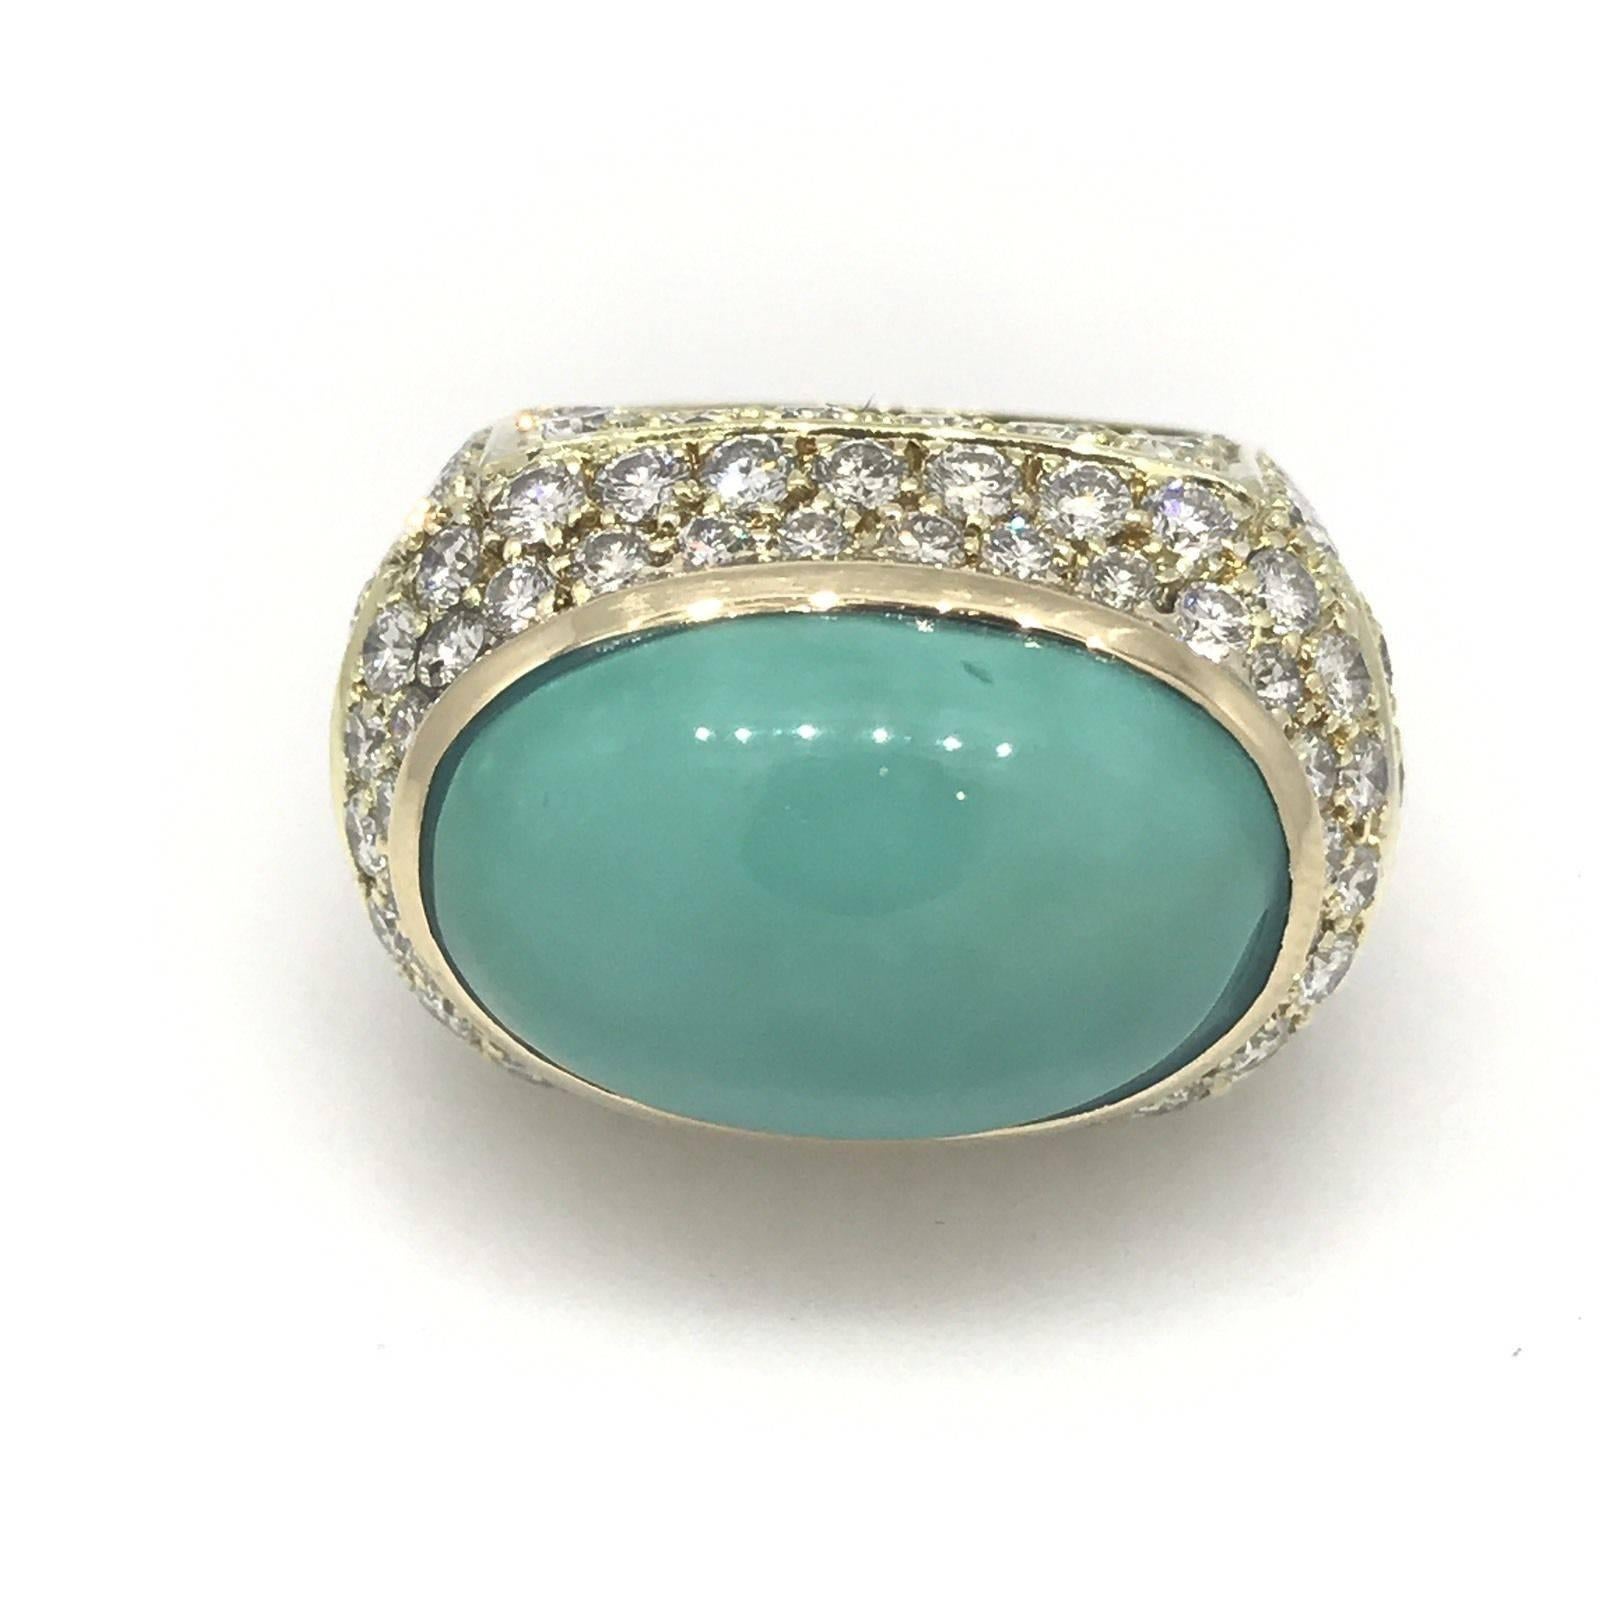 Large Turquoise and Diamond Dome Ring in 18k Yellow Gold featuring
7.50 carats of round brilliant diamonds pave set around the turquoise and on all four sides of the gallery. Diamond quality is VS clarity, G-H color. 
Oval Cabochon Turquoise weighs